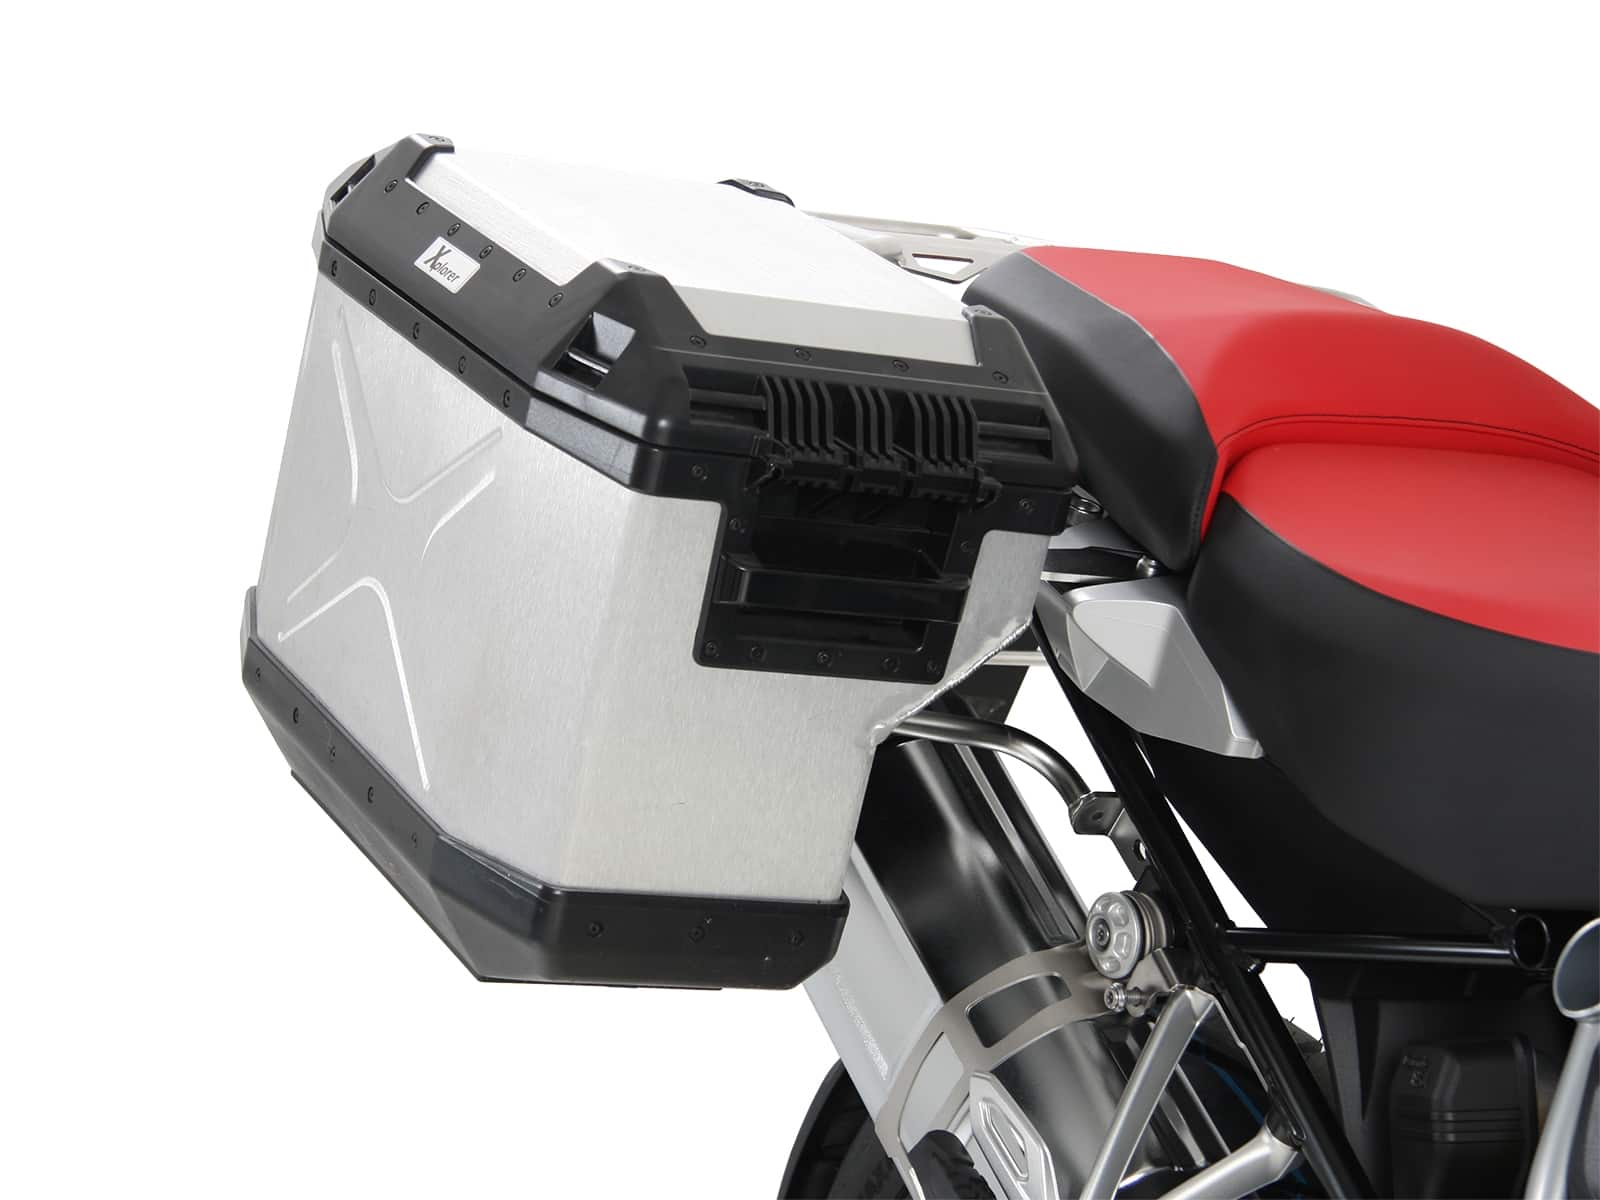 Sidecarrier Cutout stainless steel incl. Xplorer sideboxes silver for BMW R1250GS Adventure (2019-)